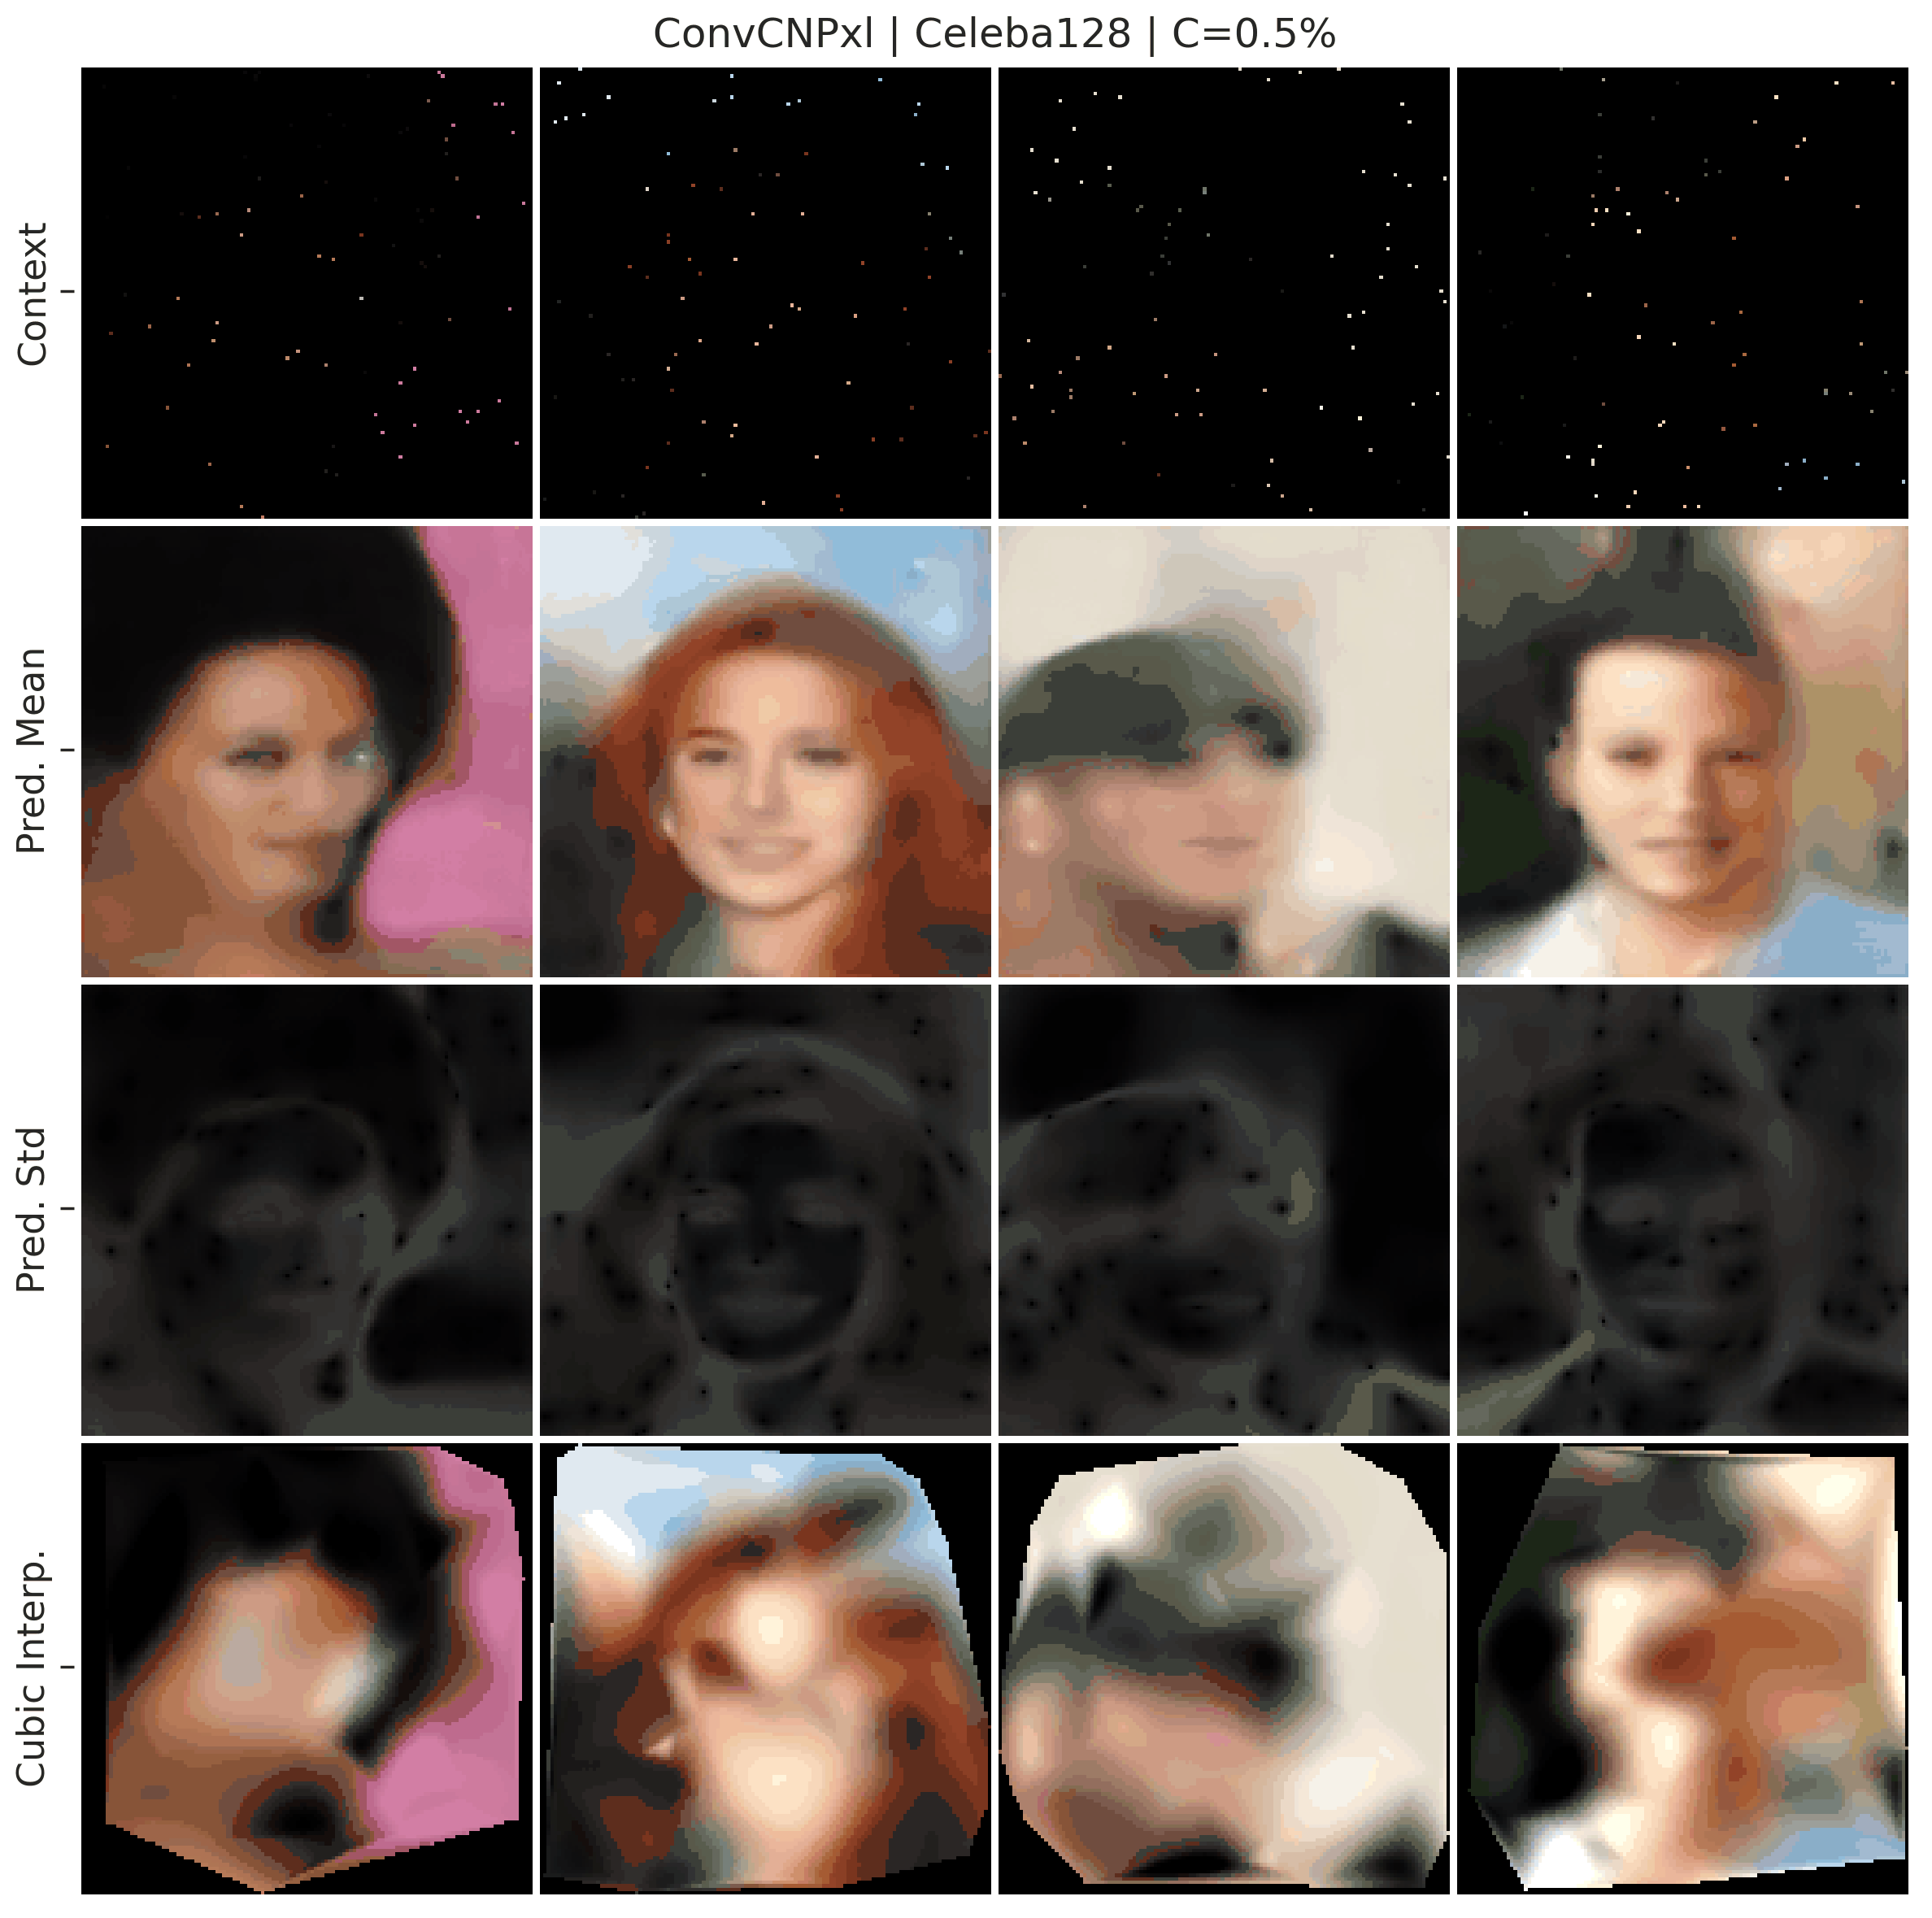 Image completion with ConvCNP